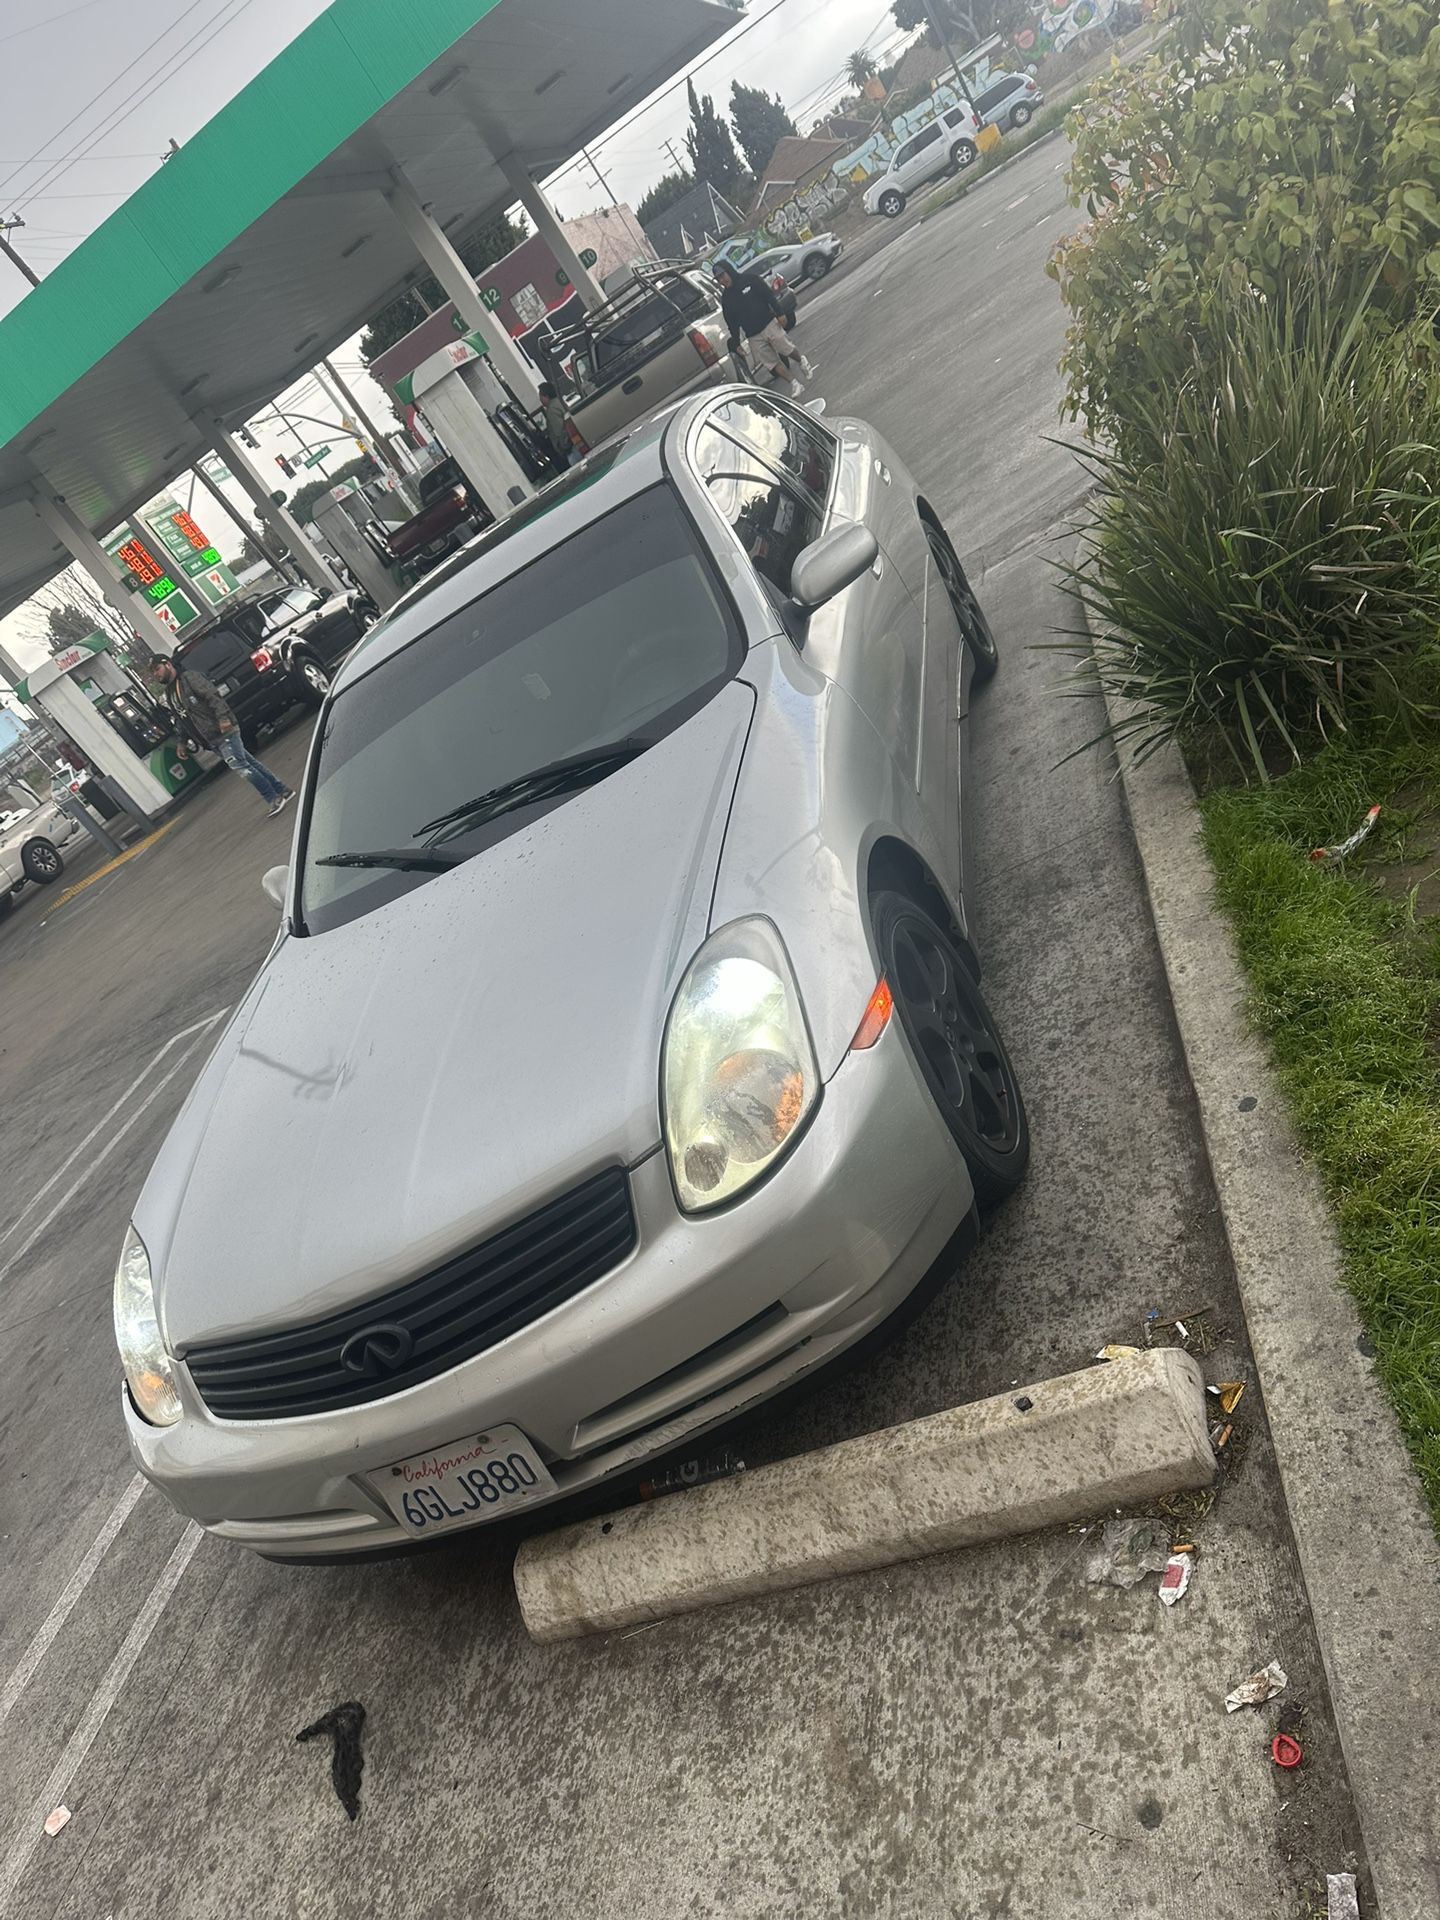 Infiniti G35 Part out 